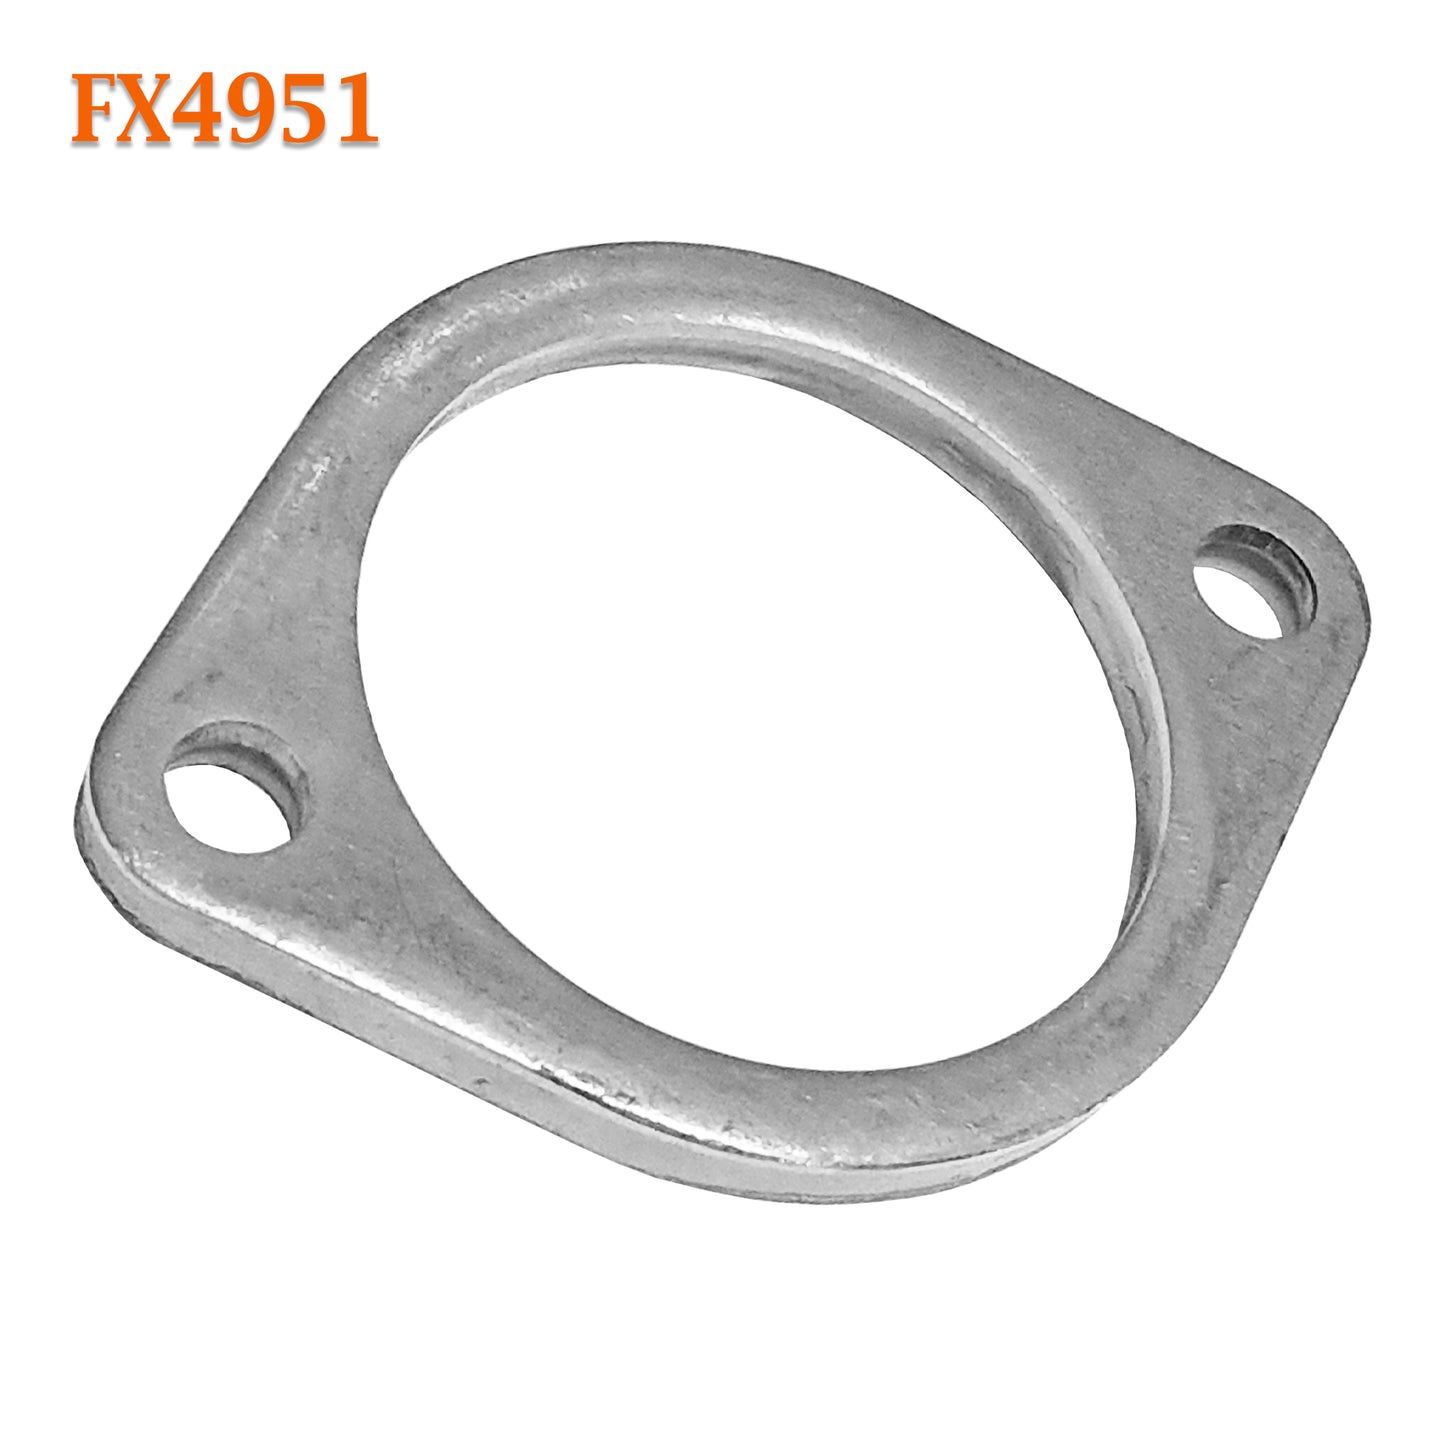 FX4951 3" ID Flat Oval Two Bolt Exhaust Flange Repair Replacement Fits 3" Pipe